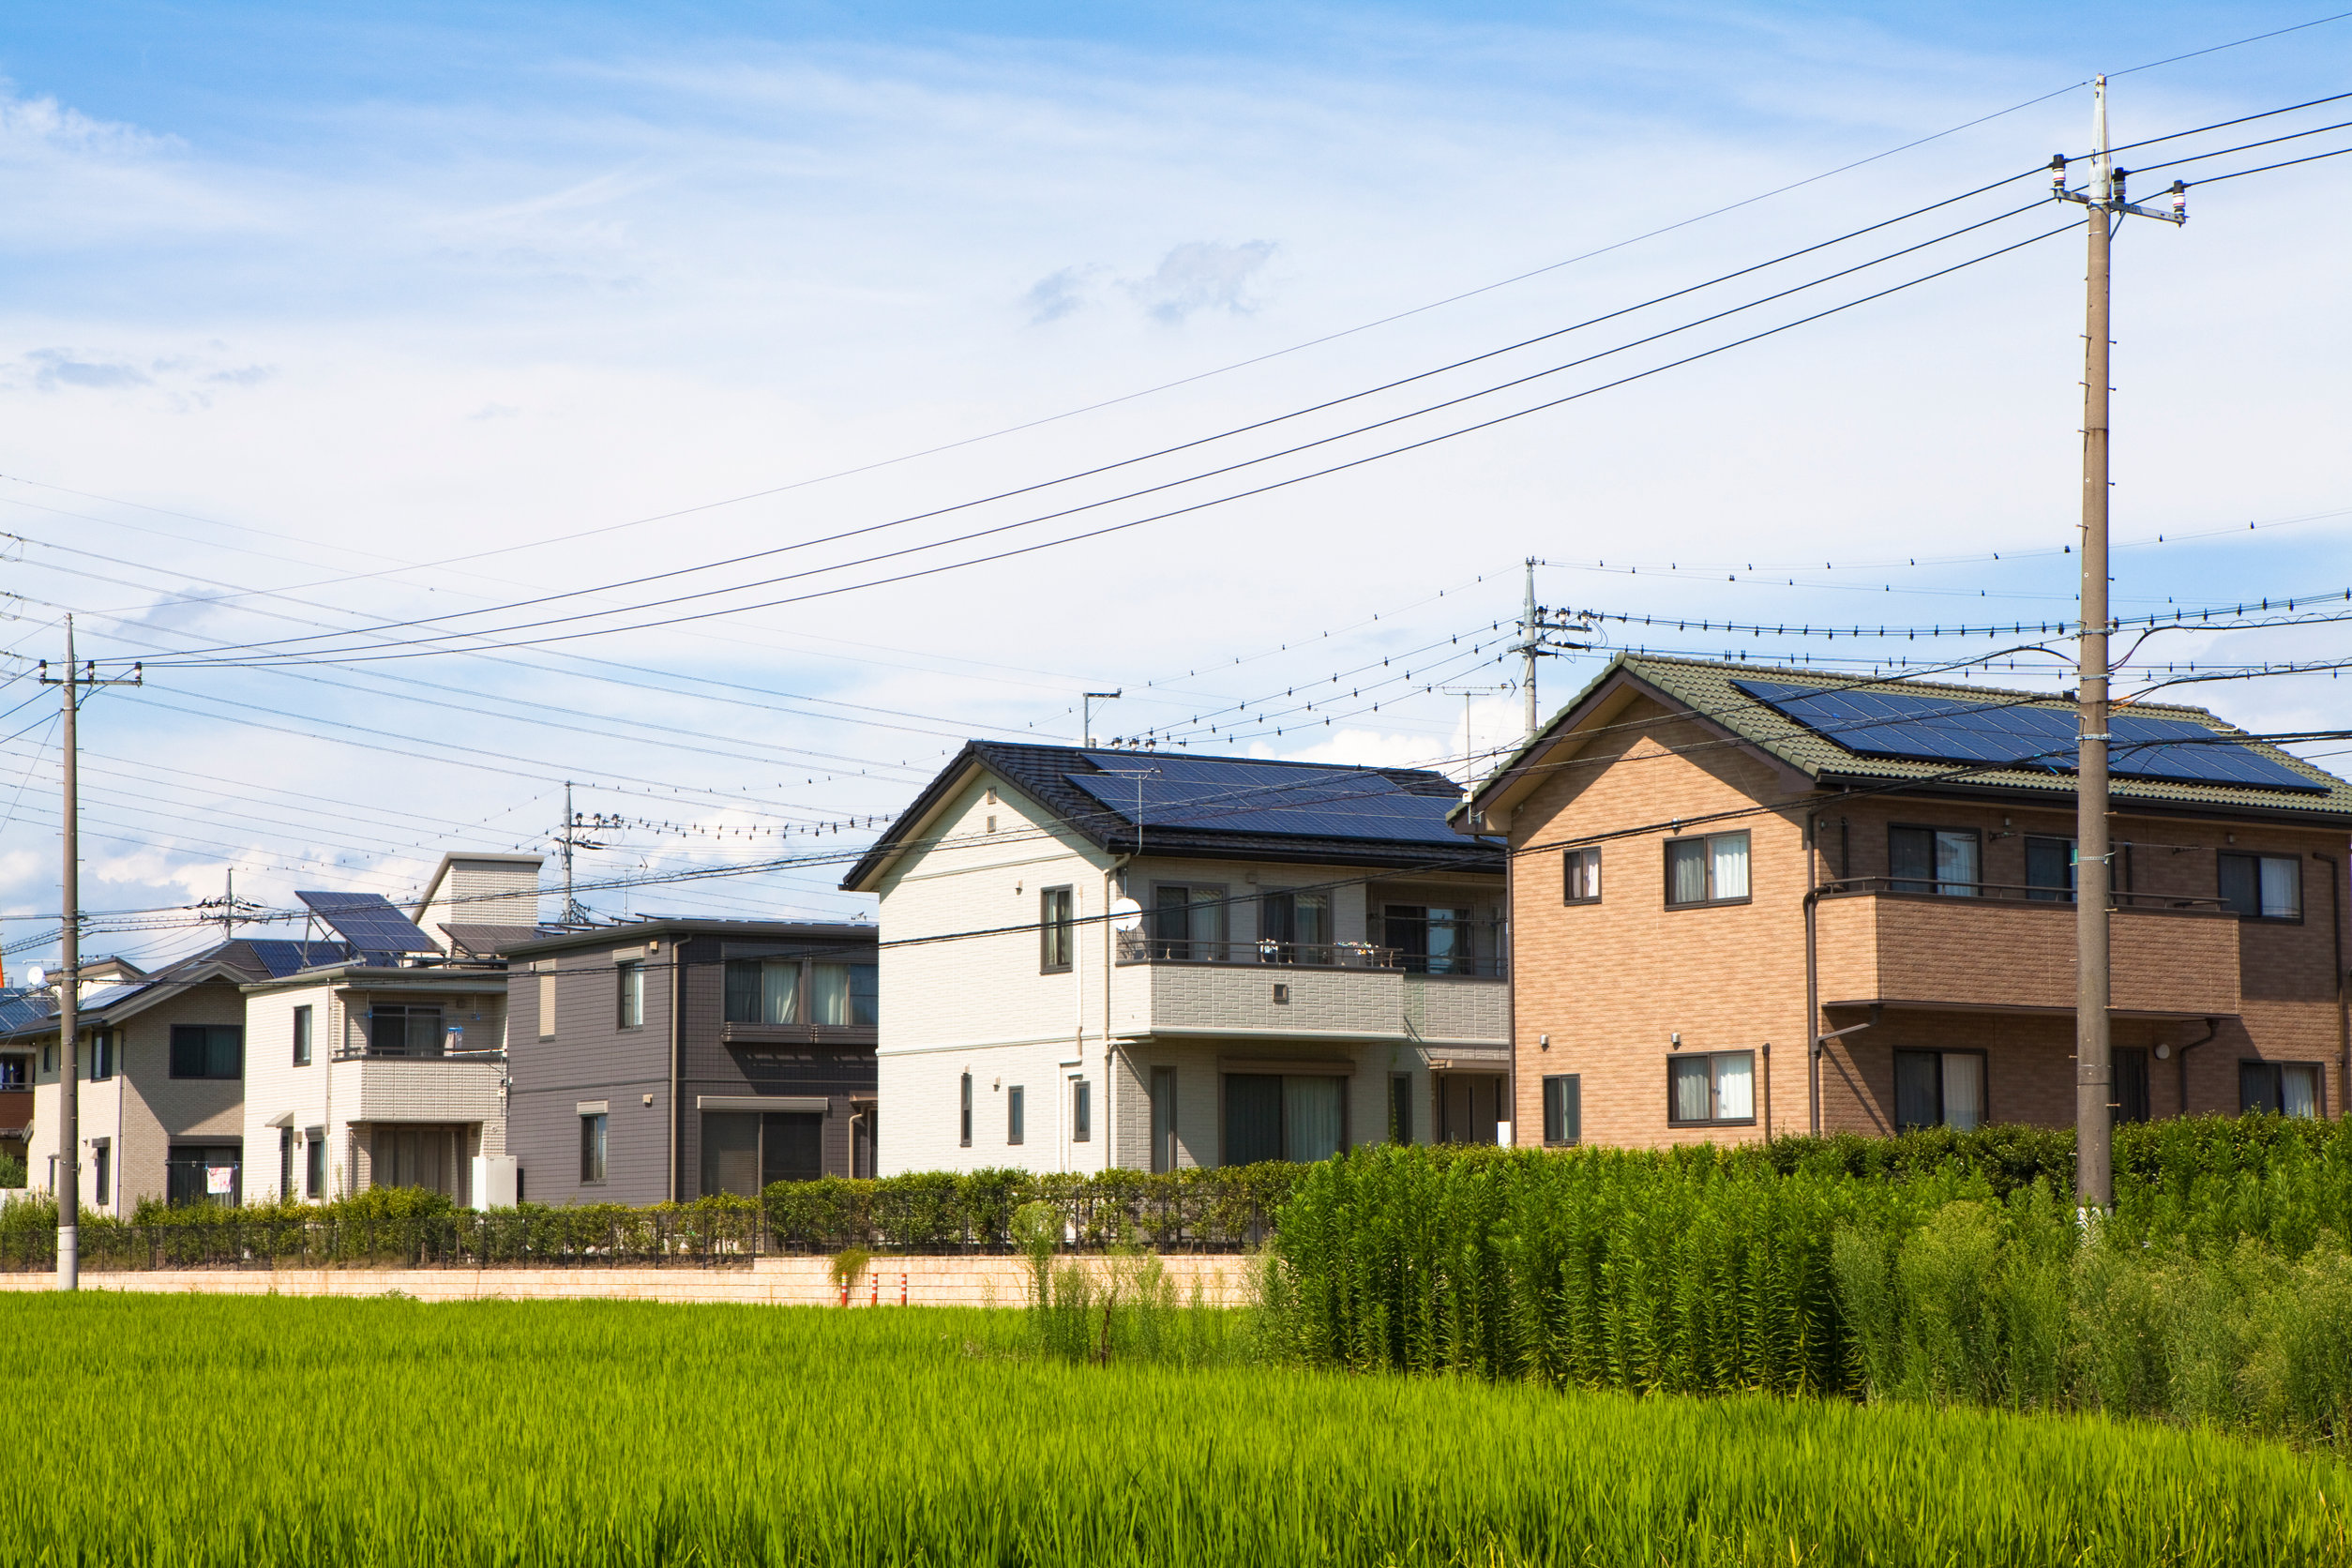 Residential area with solar panels